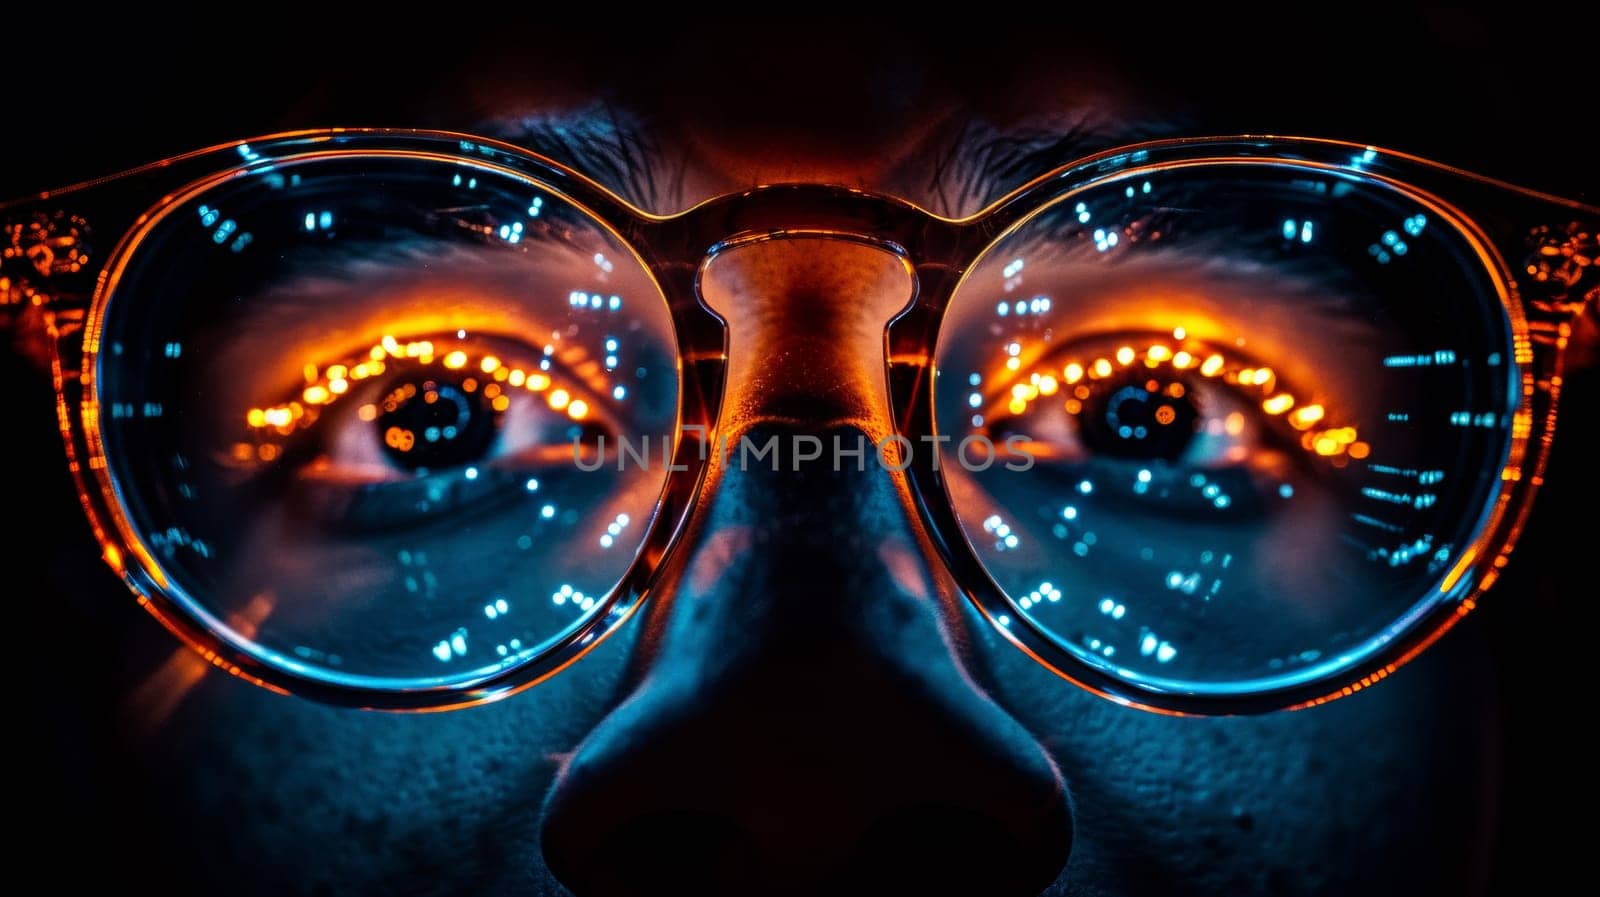 A close up of a man's face with glowing eyes and glasses